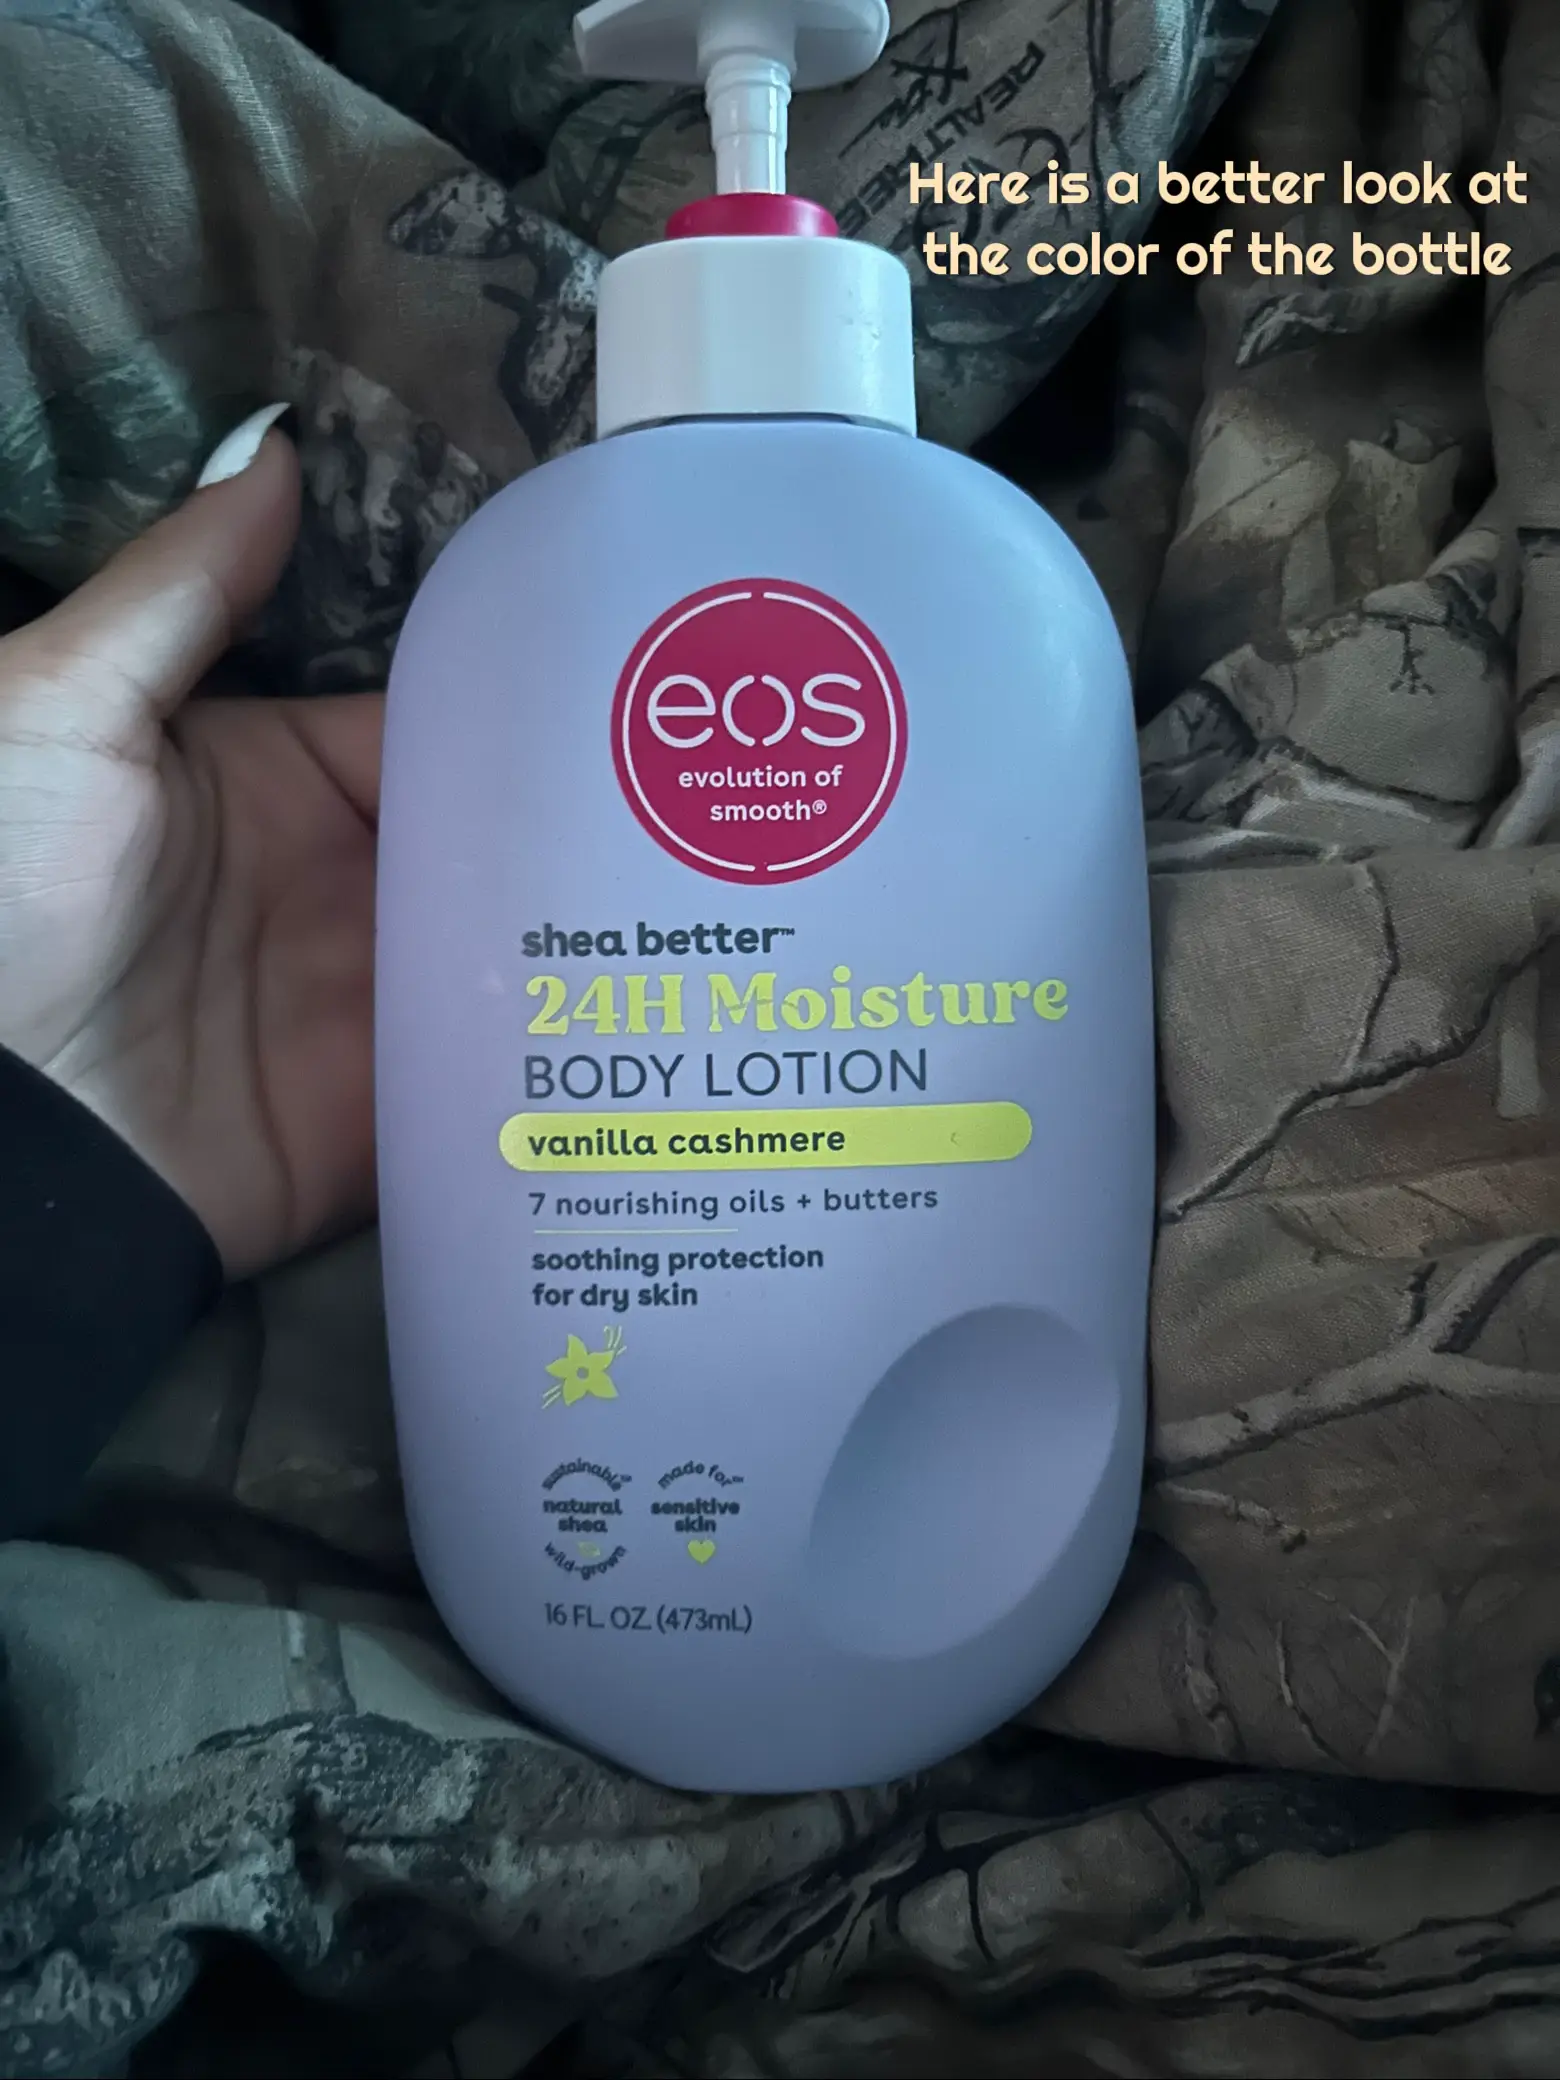  A bottle of body lotion with a